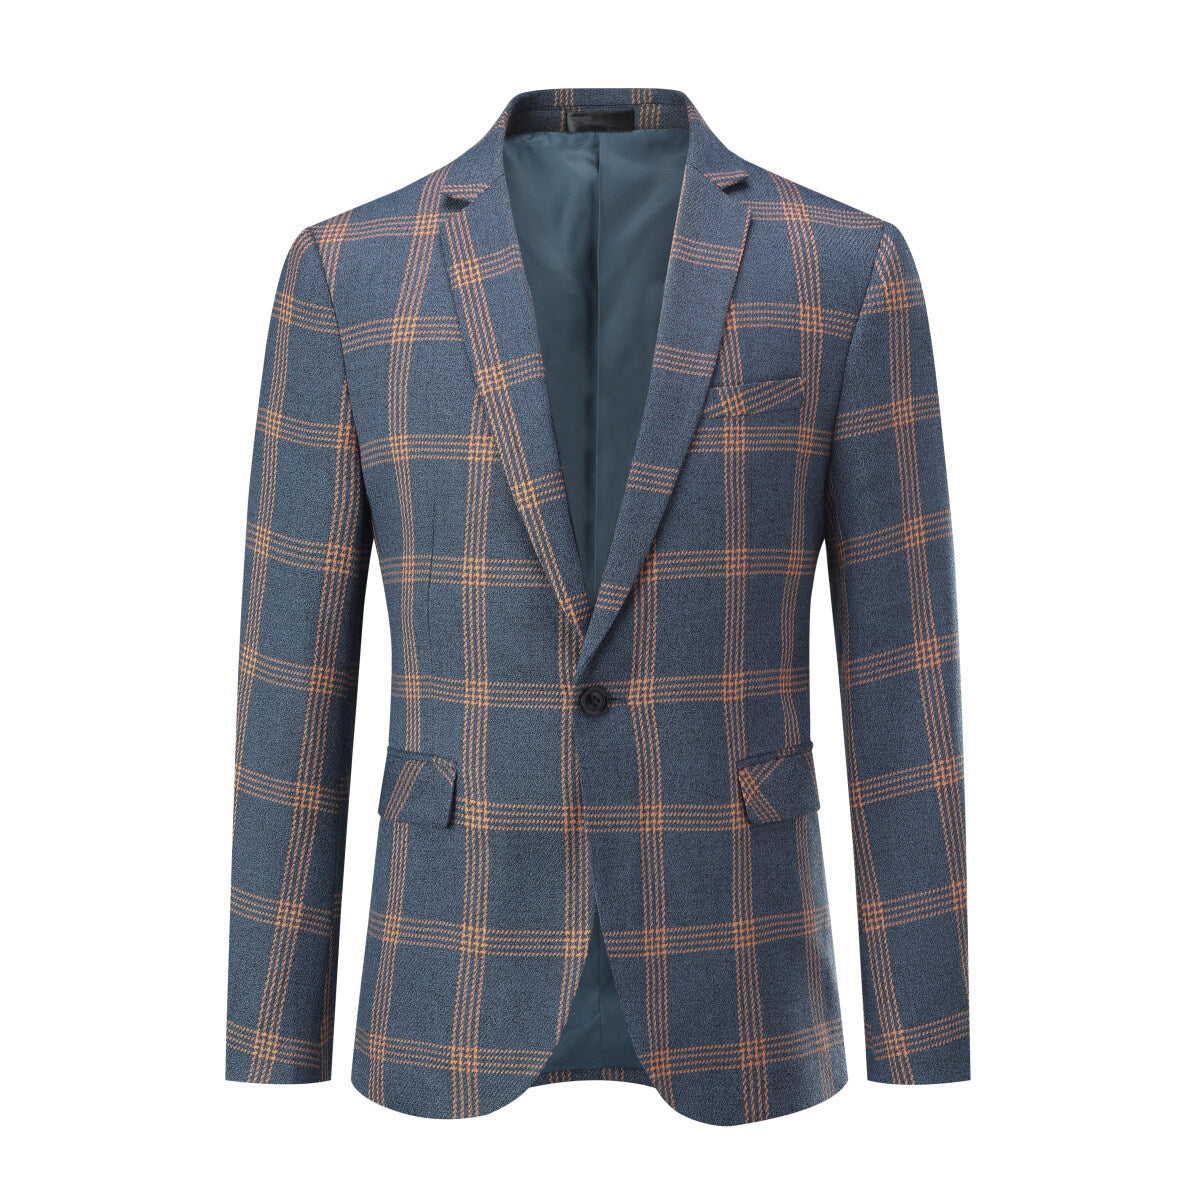 Men's Checkered Flat Collar Single-Breasted Suit